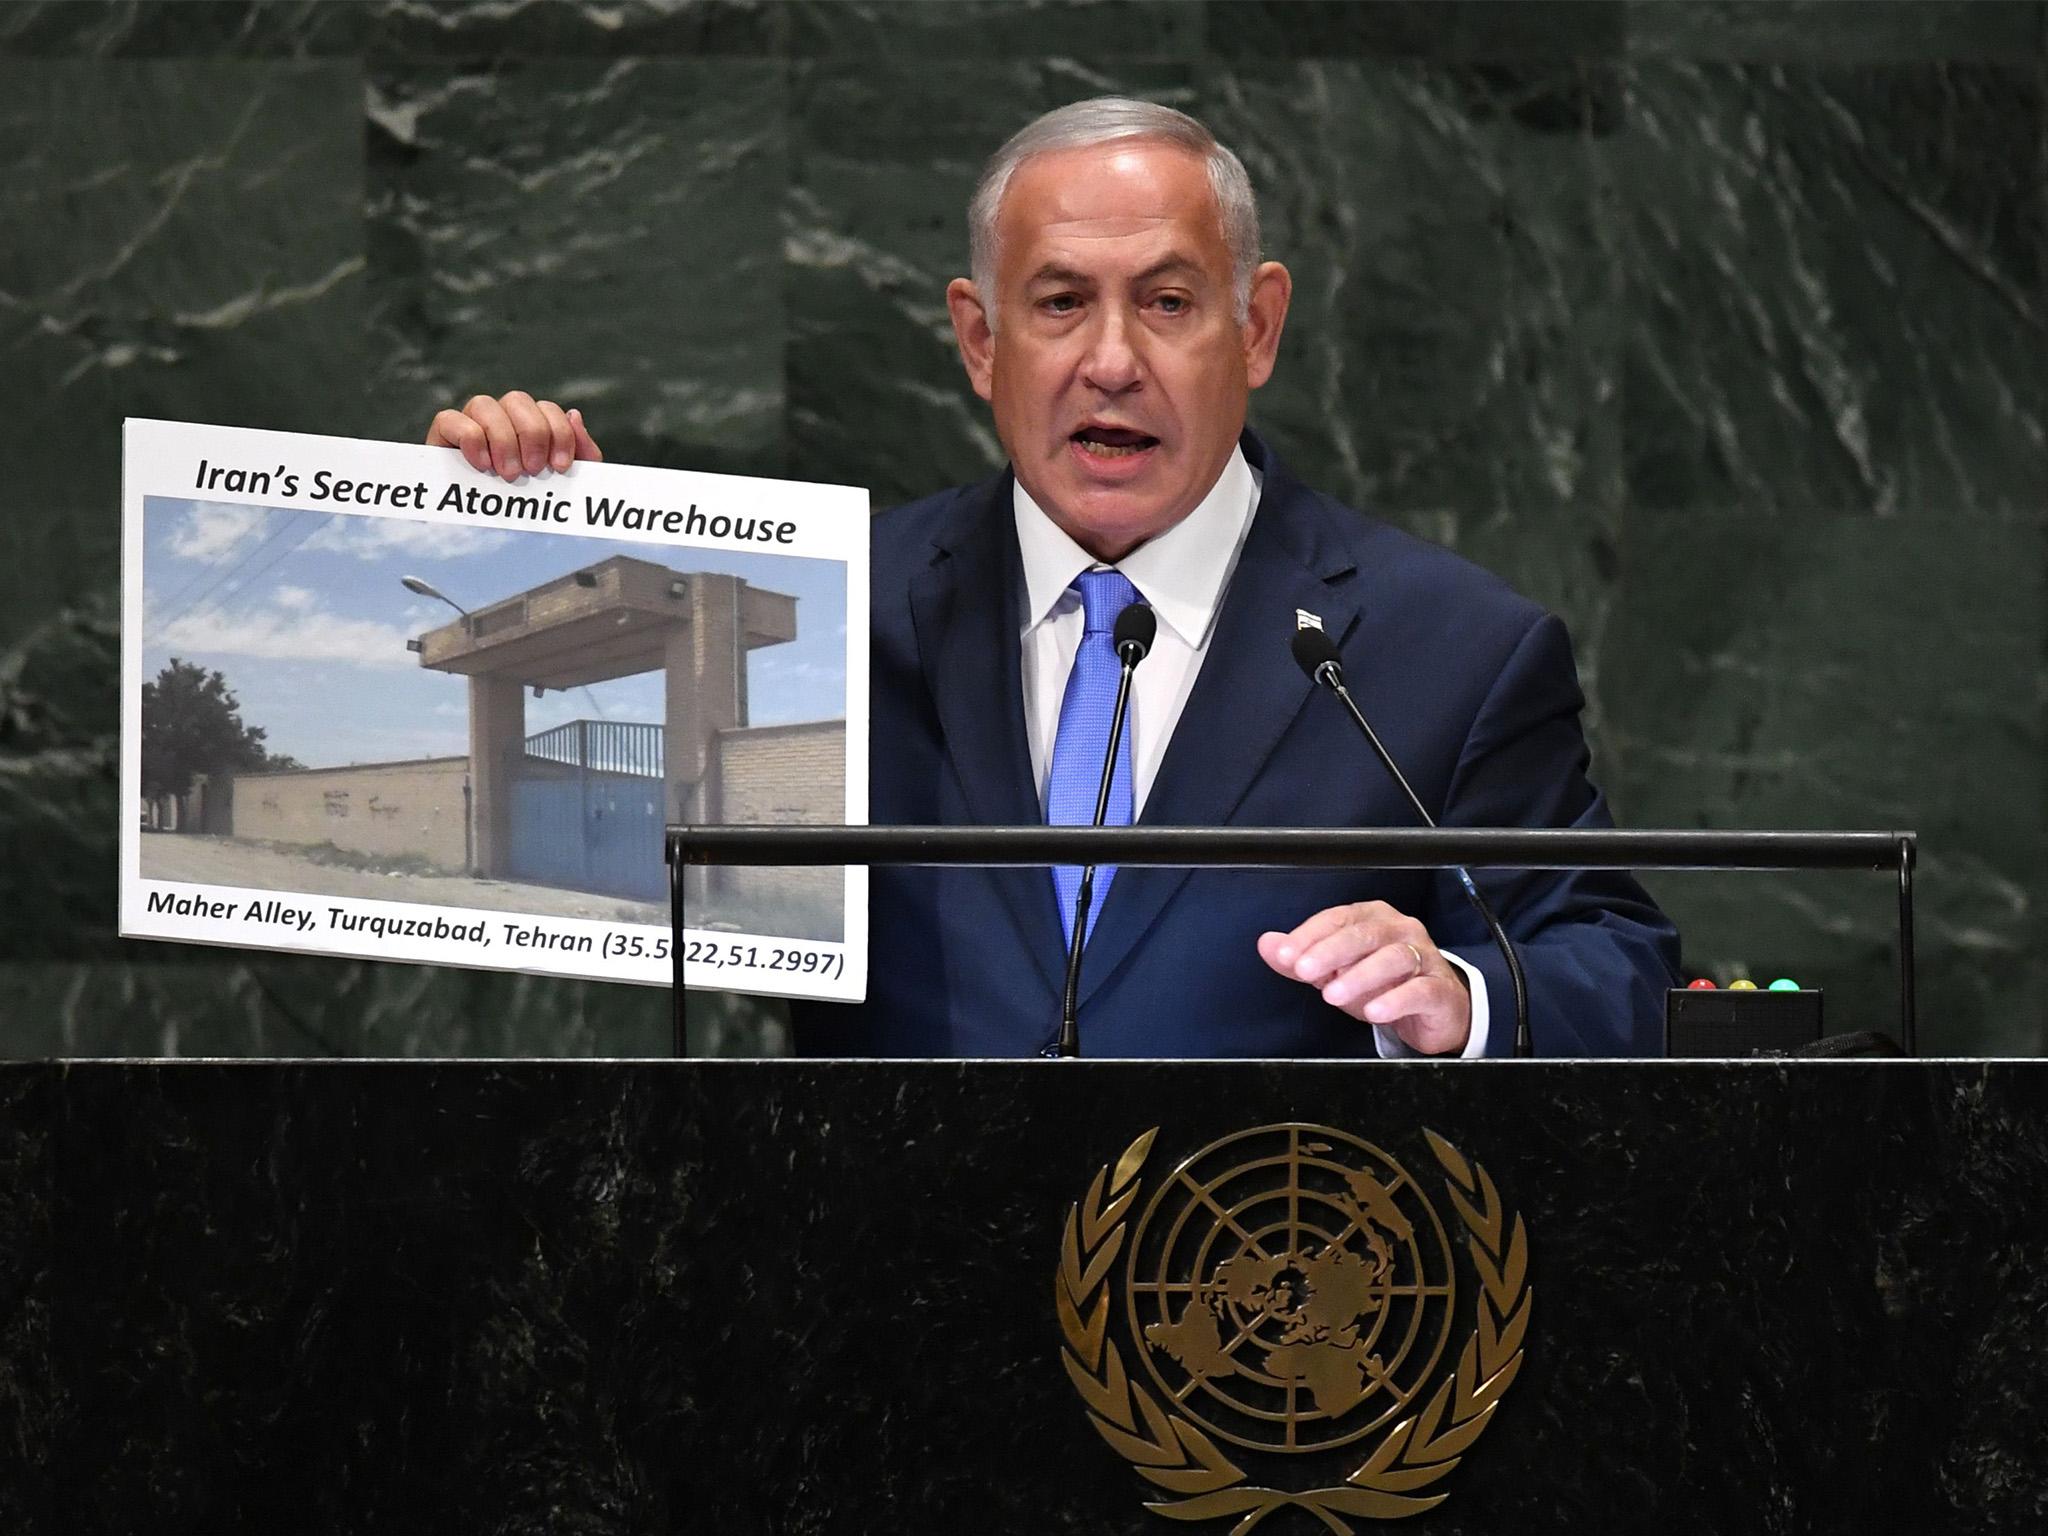 Evidence of a secret atomic warehouse in Tehran is presented by Israeli prime minister Benjamin Netanyahu (Timothy Clary/AFP/Getty)